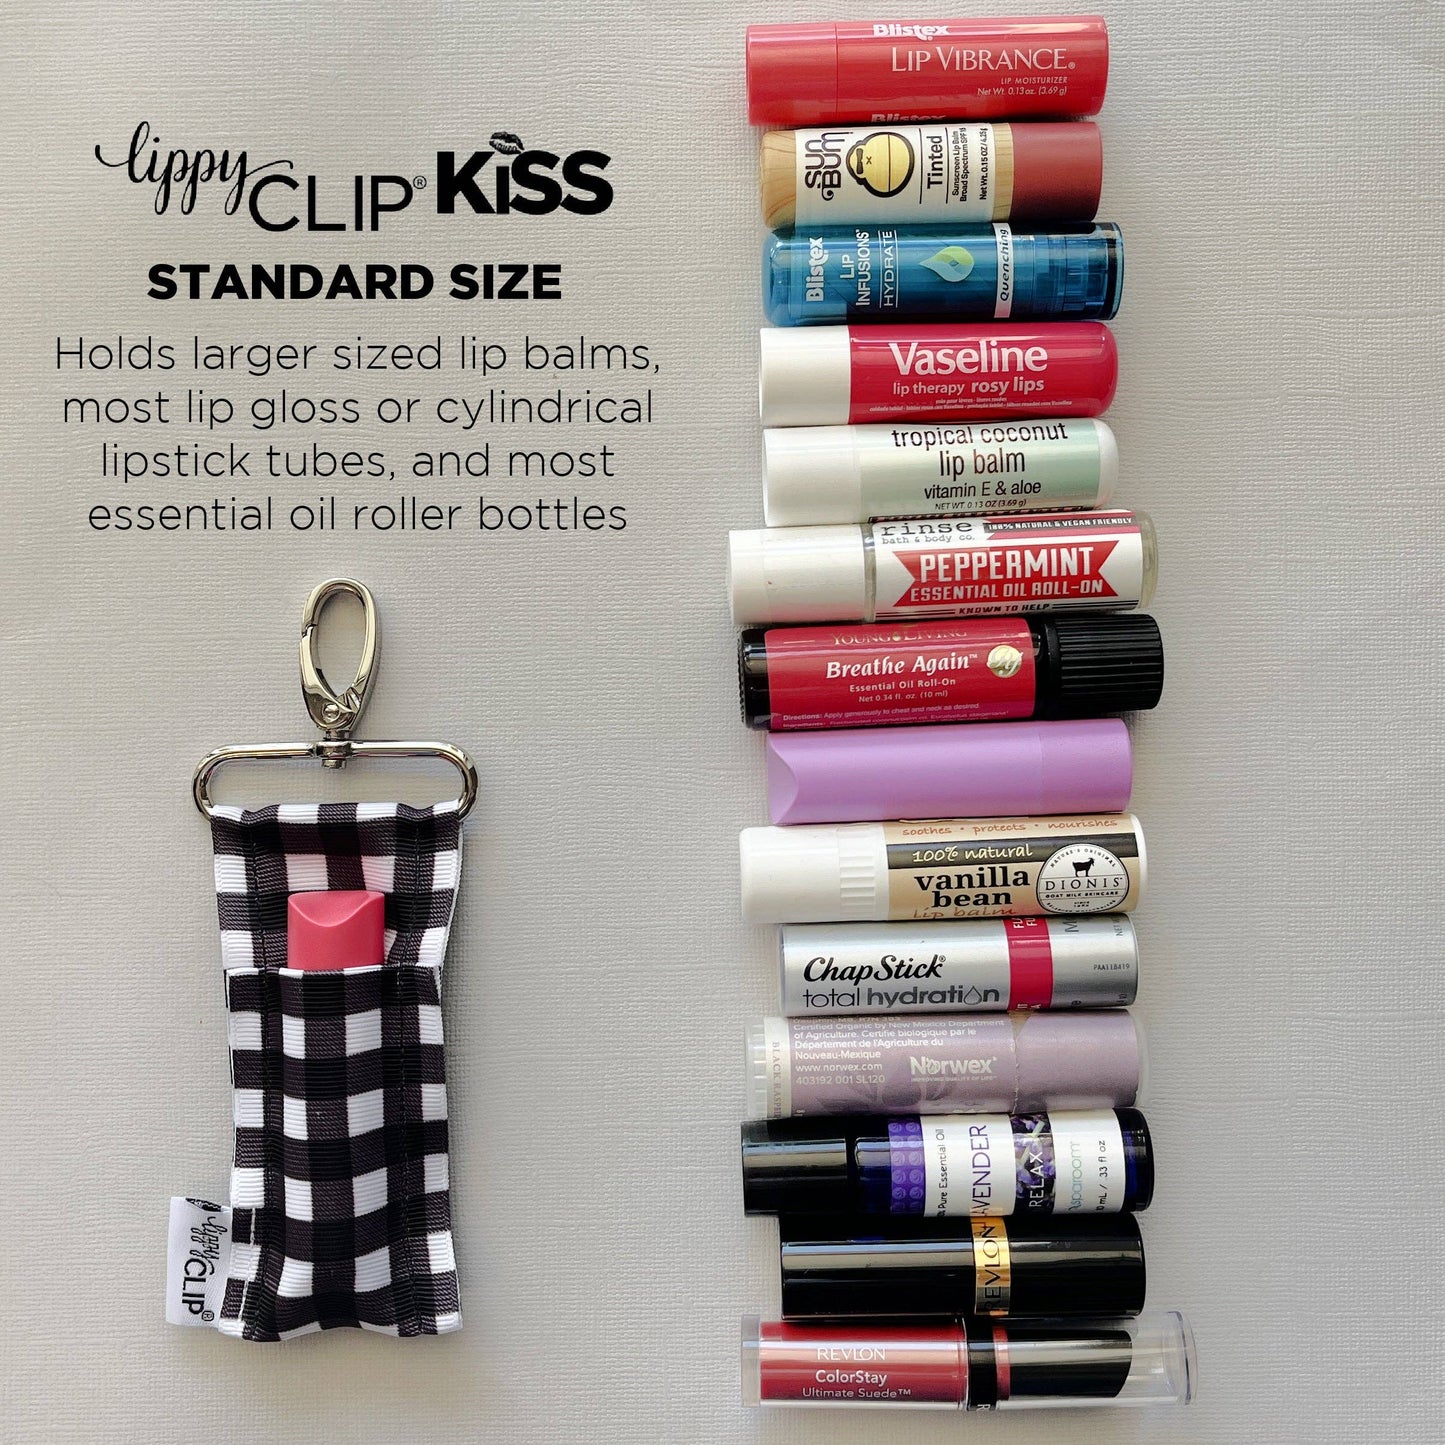 Buffalo Plaid LippyClipKISS for larger lip balms, essential: Standard Size (most common)